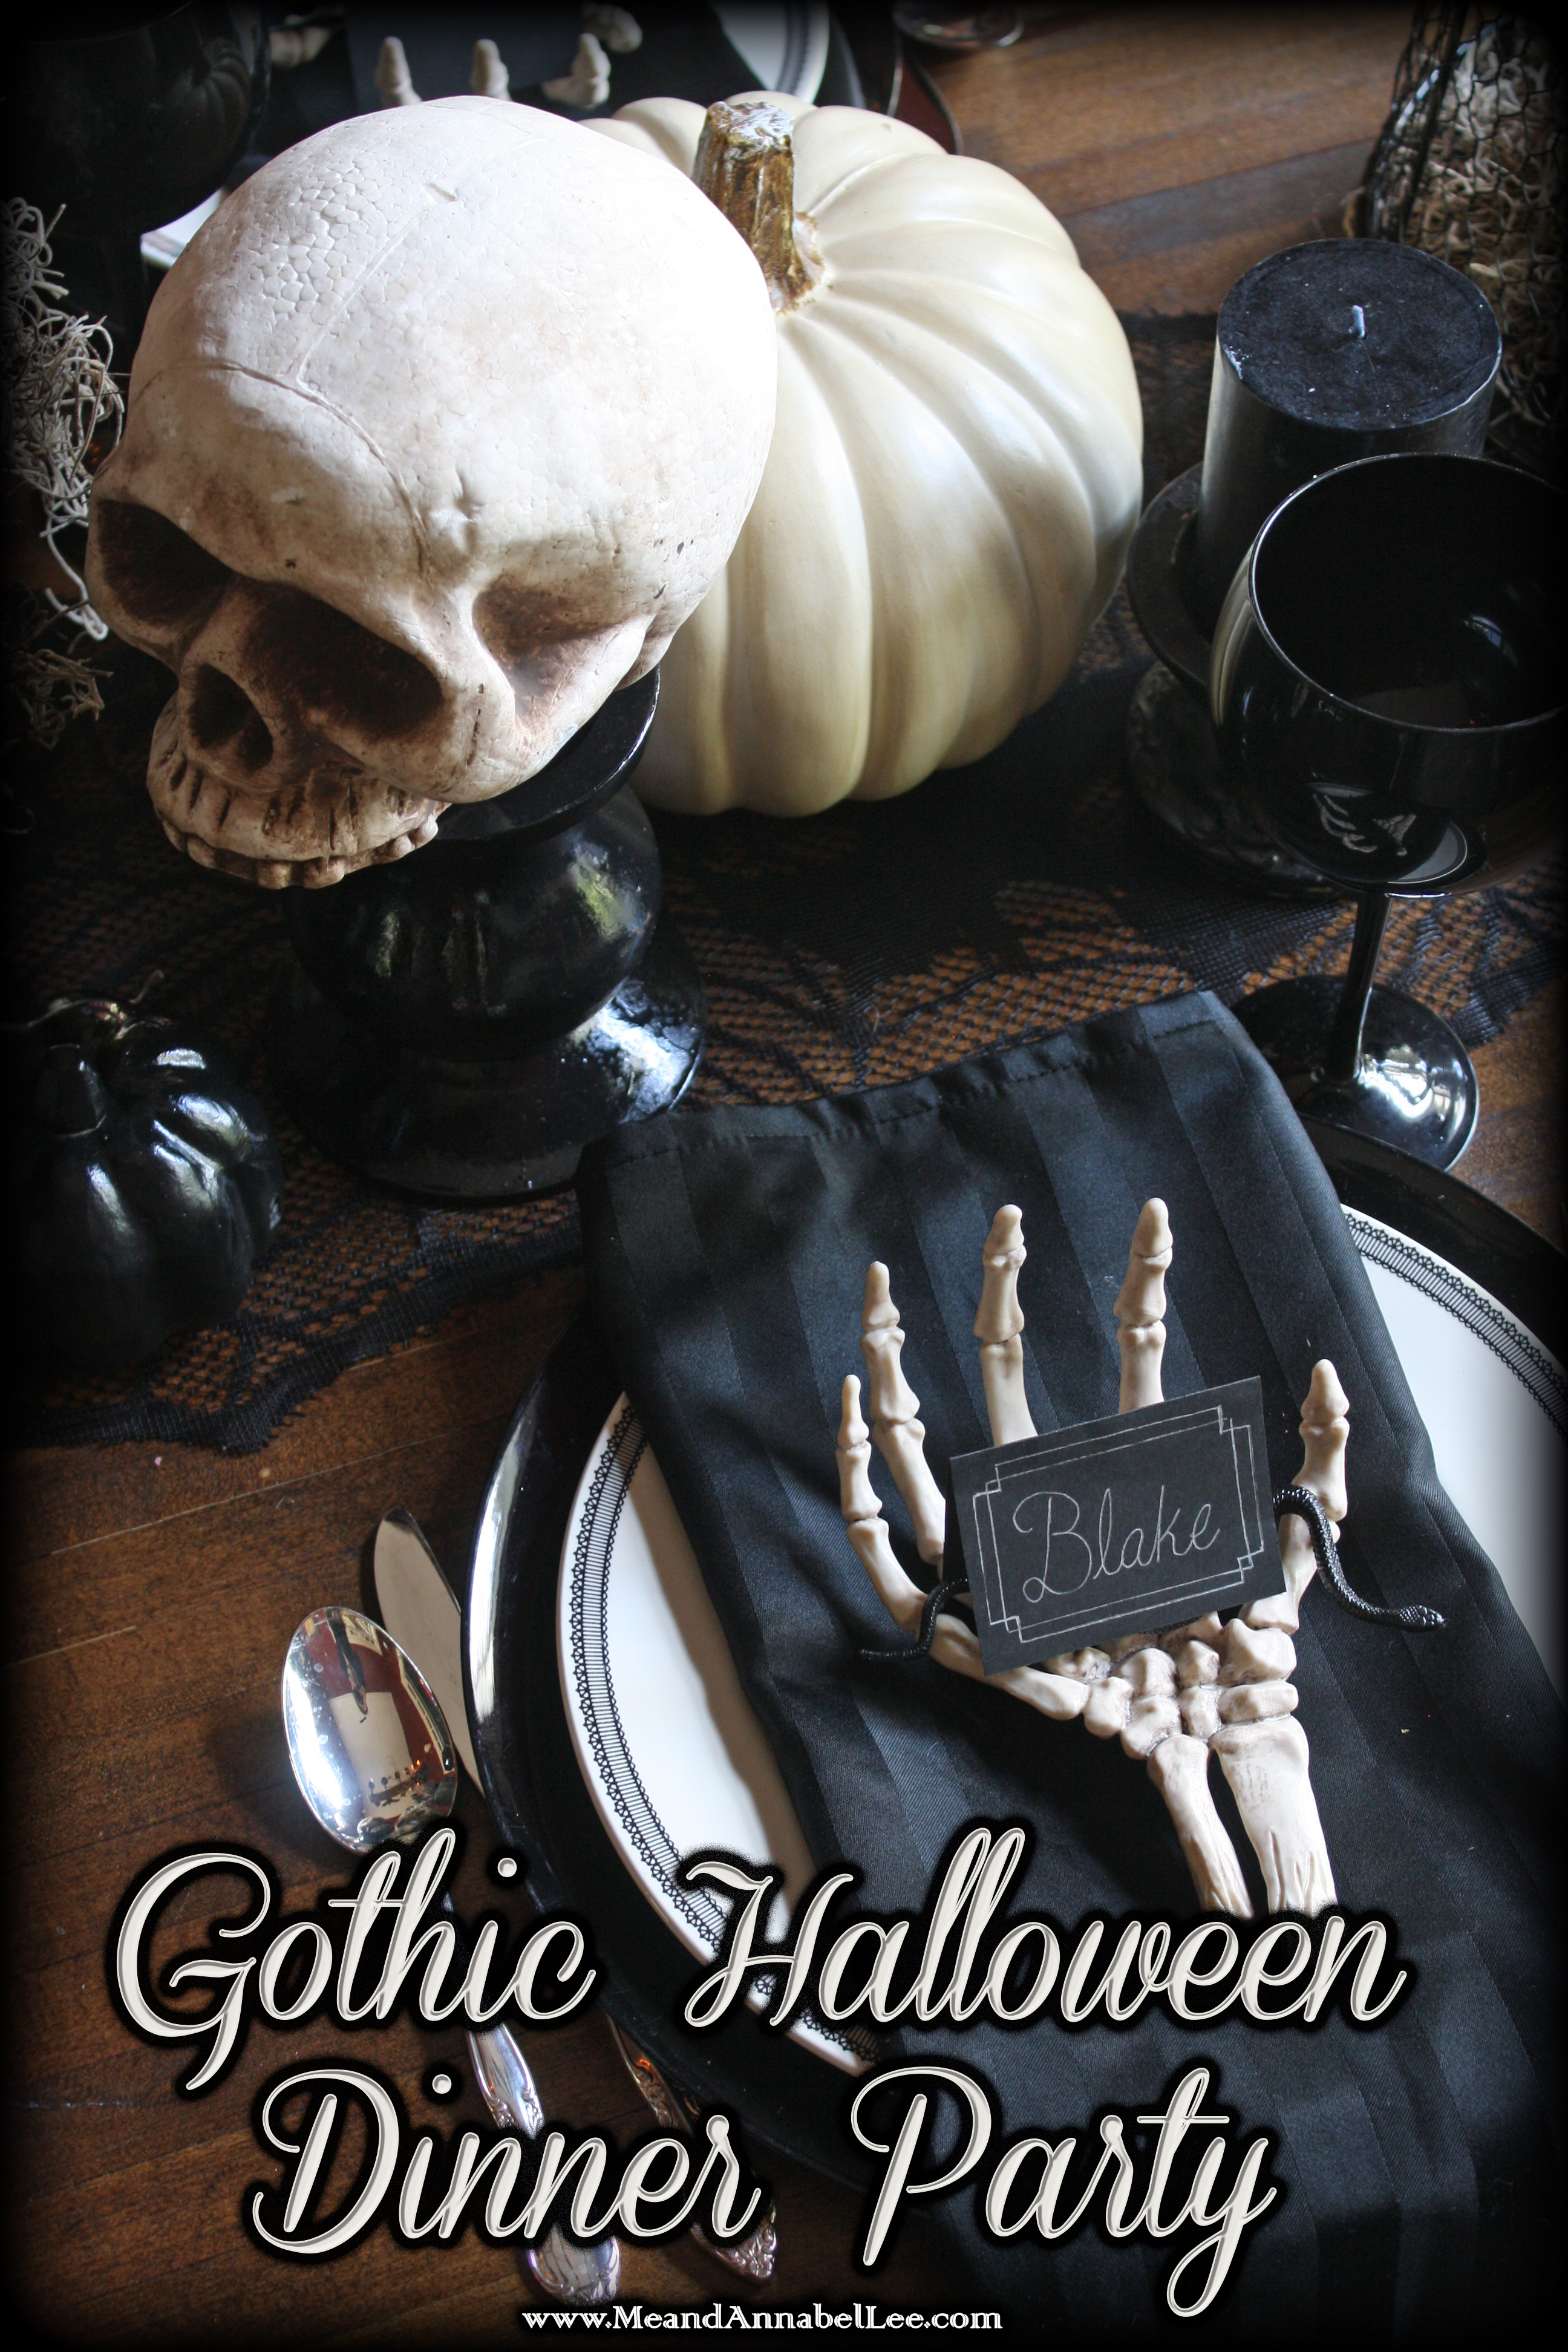 Halloween Place Setting | Gothic Dinner Party | www.MeandAnnabelLee.com